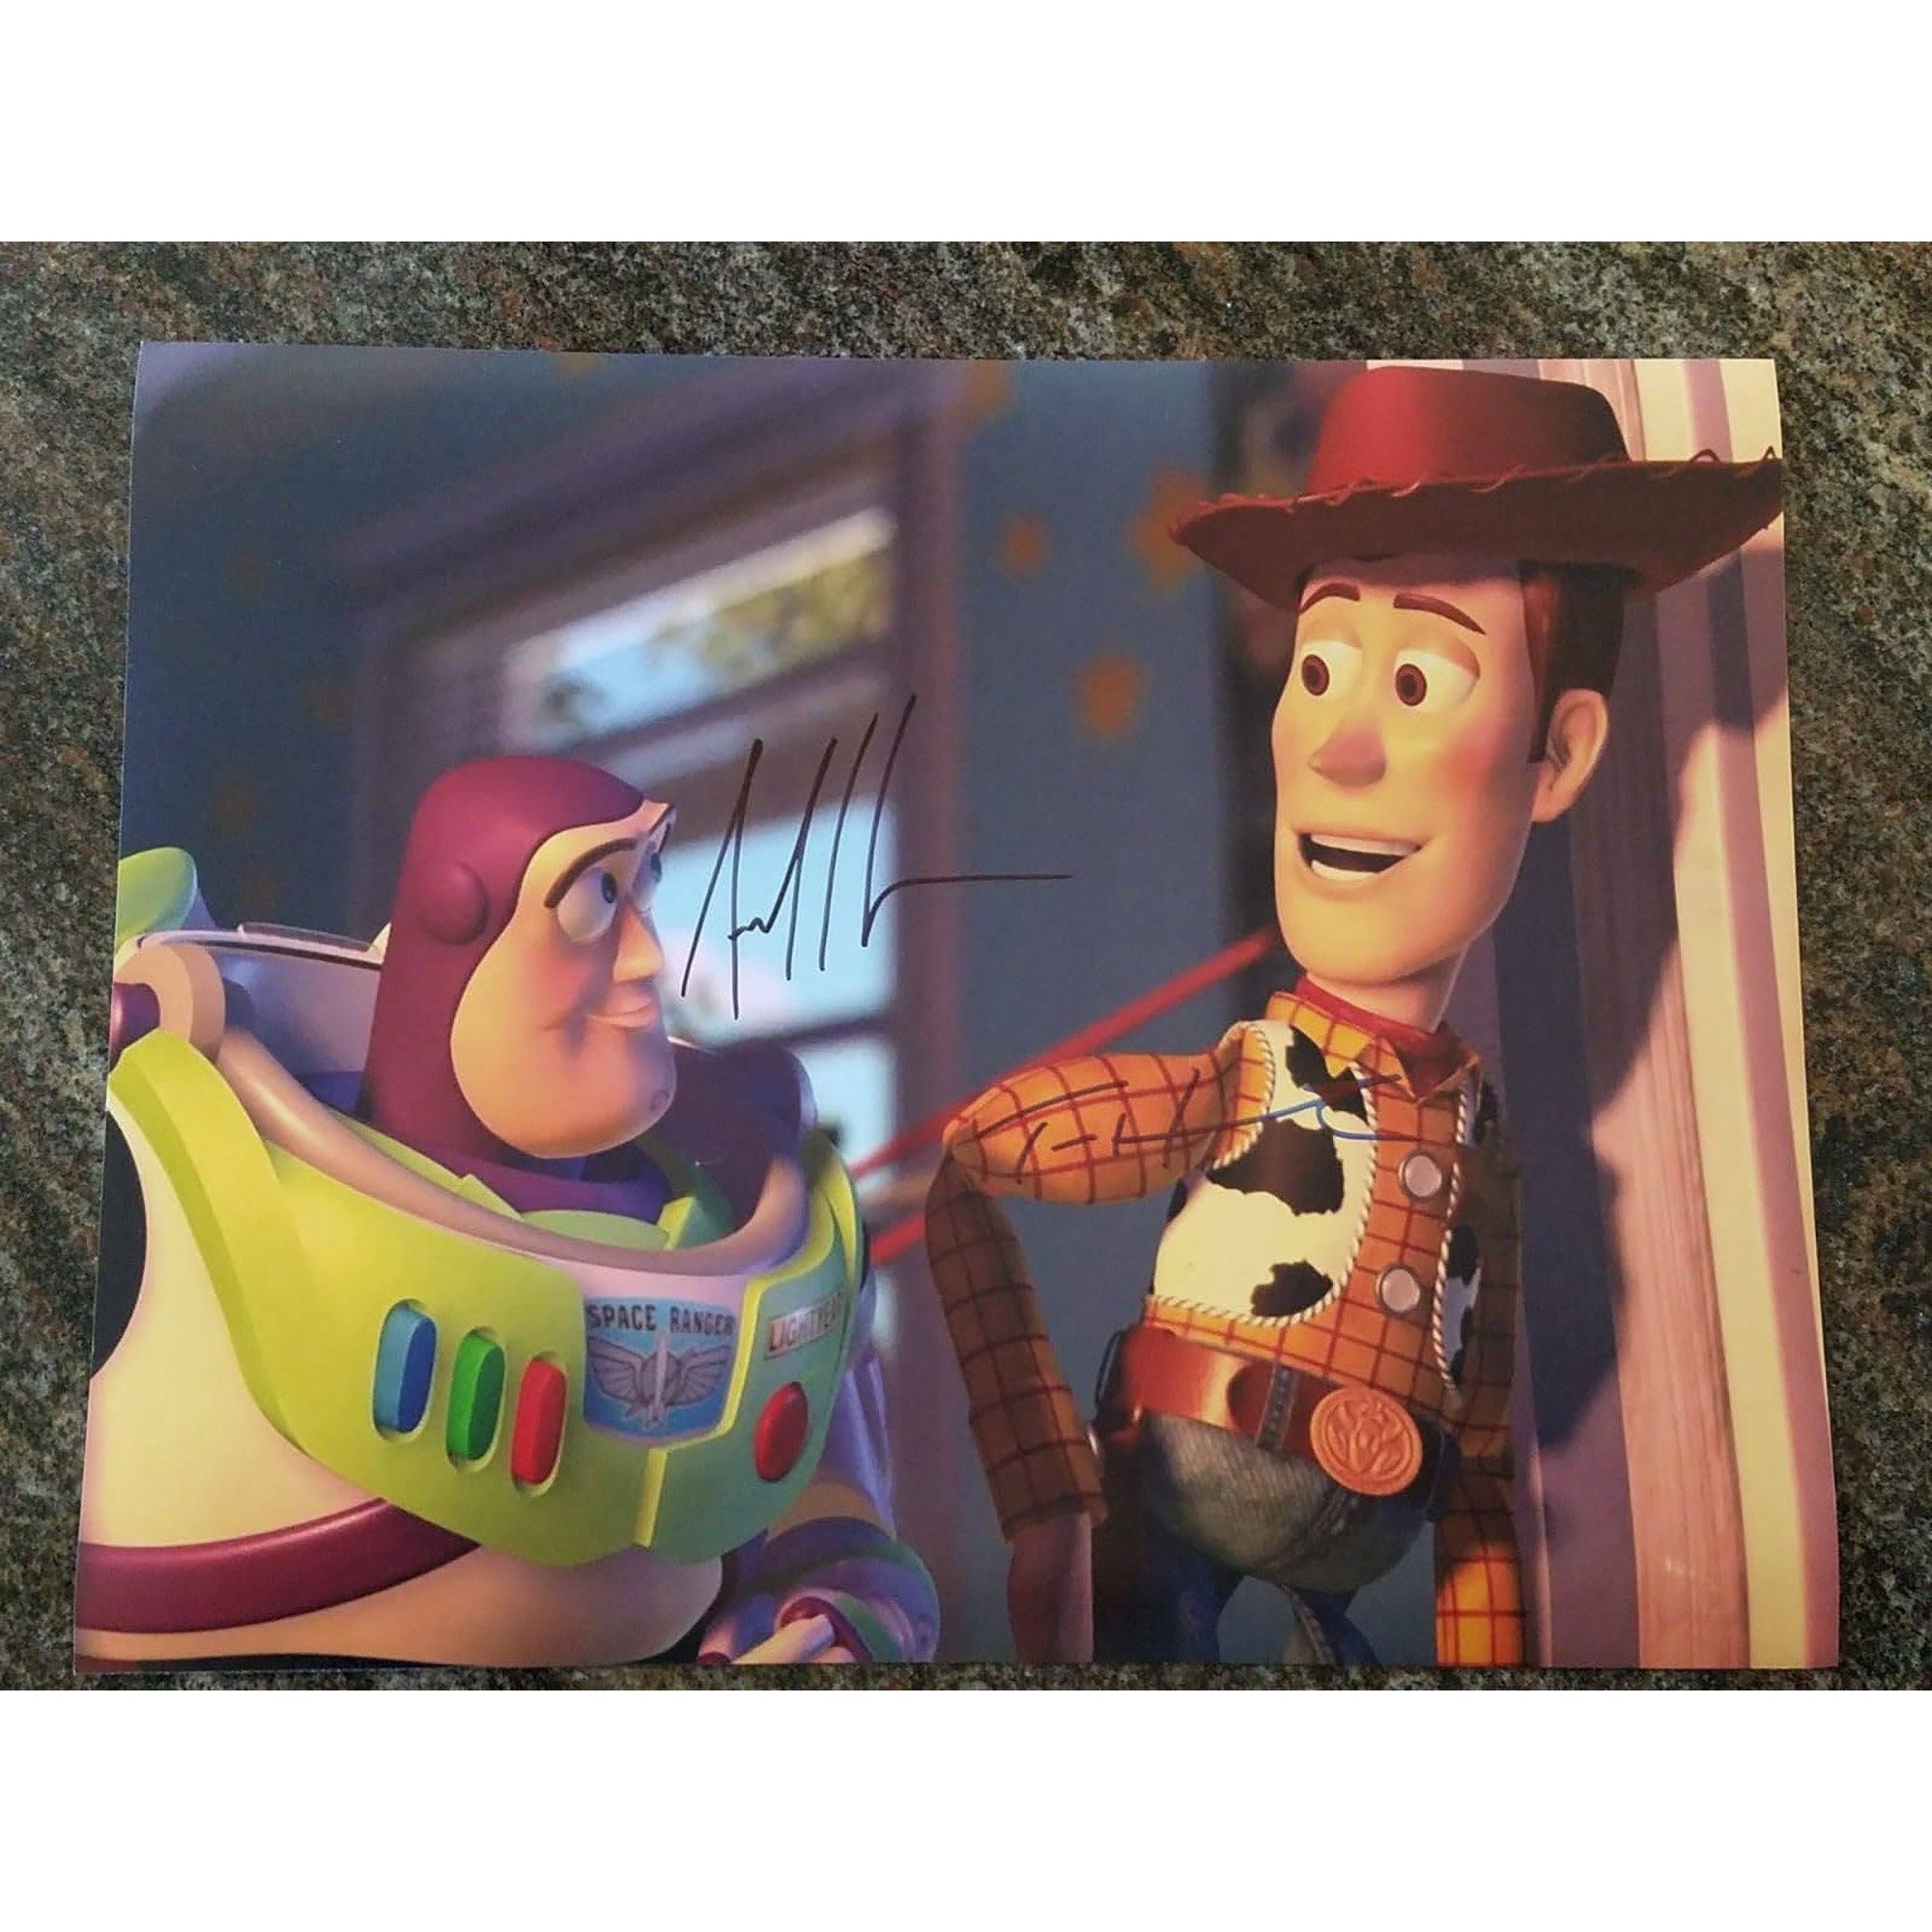 Toy Story, Tom Hanks, Tim Allen signed with proof 11 by 14